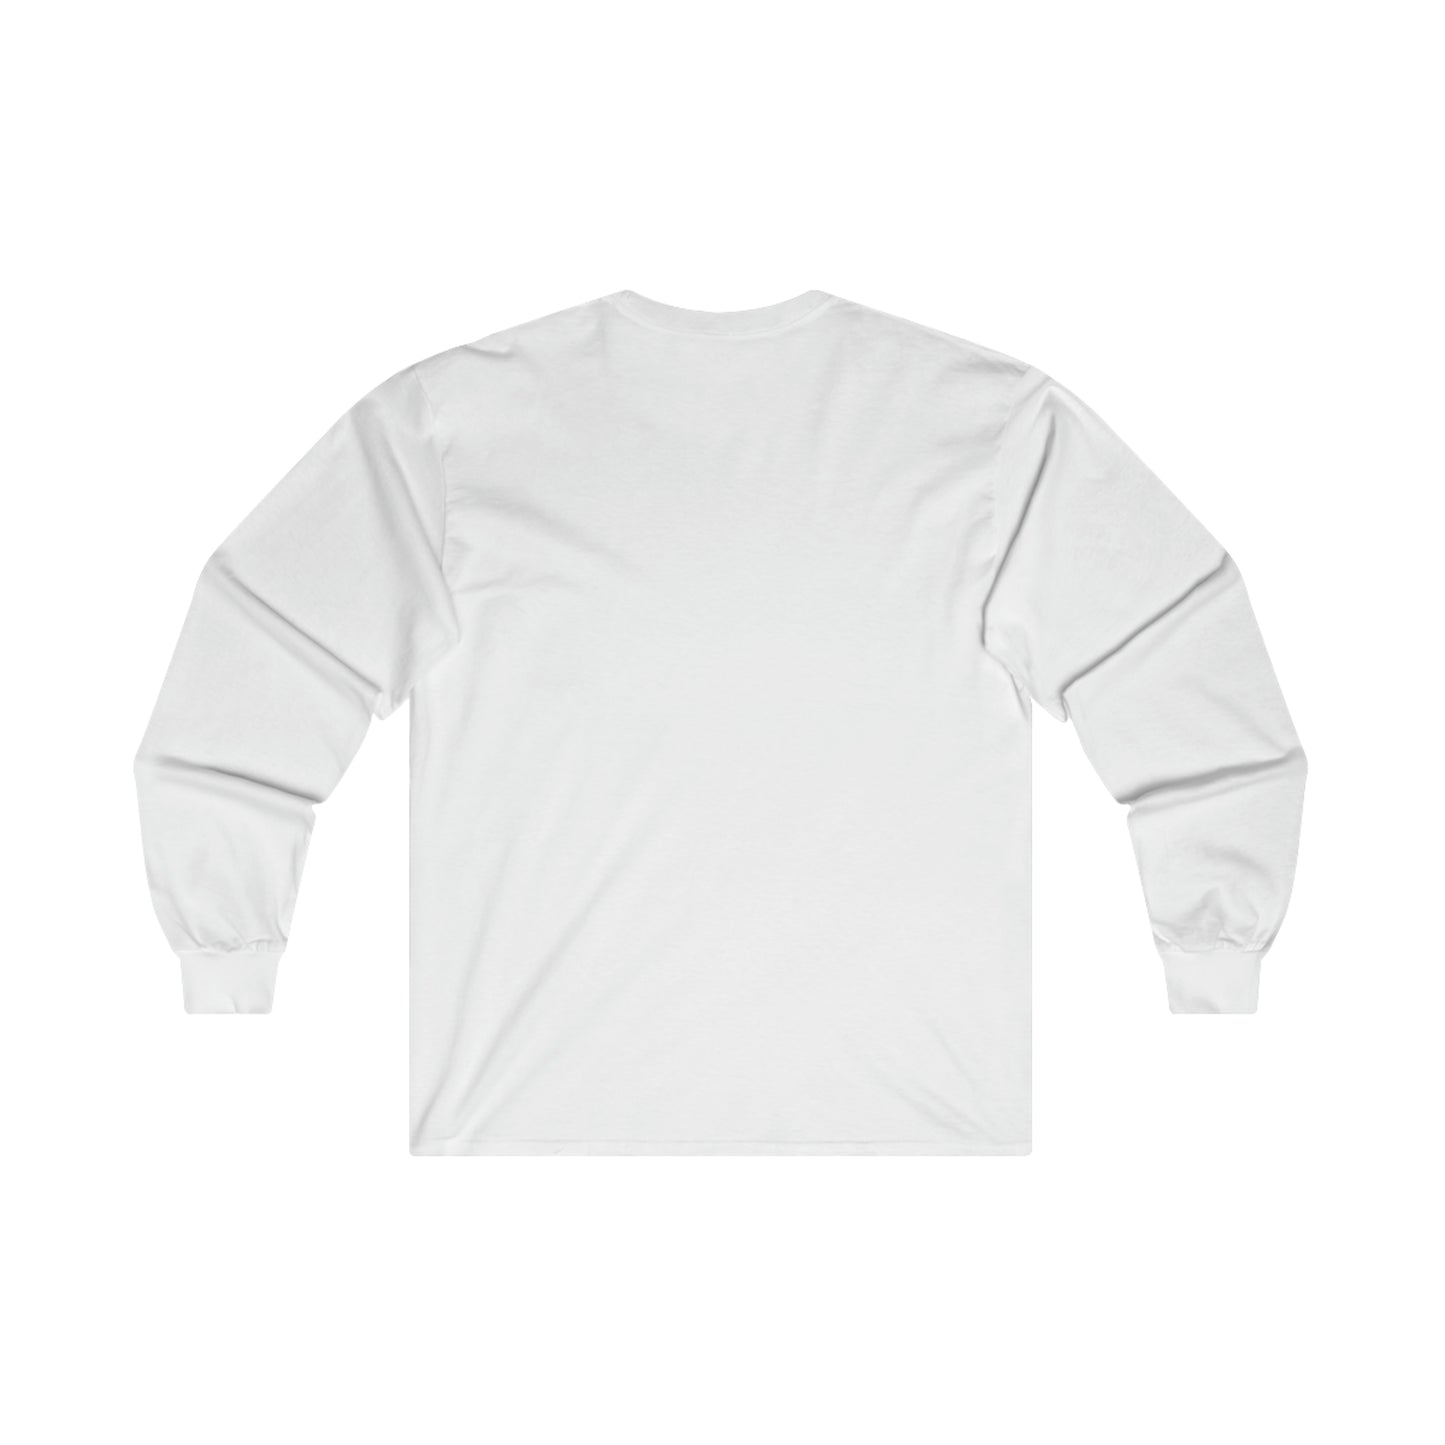 "I Need Your Grace" Cover Graphic Long Sleeve T-Shirt